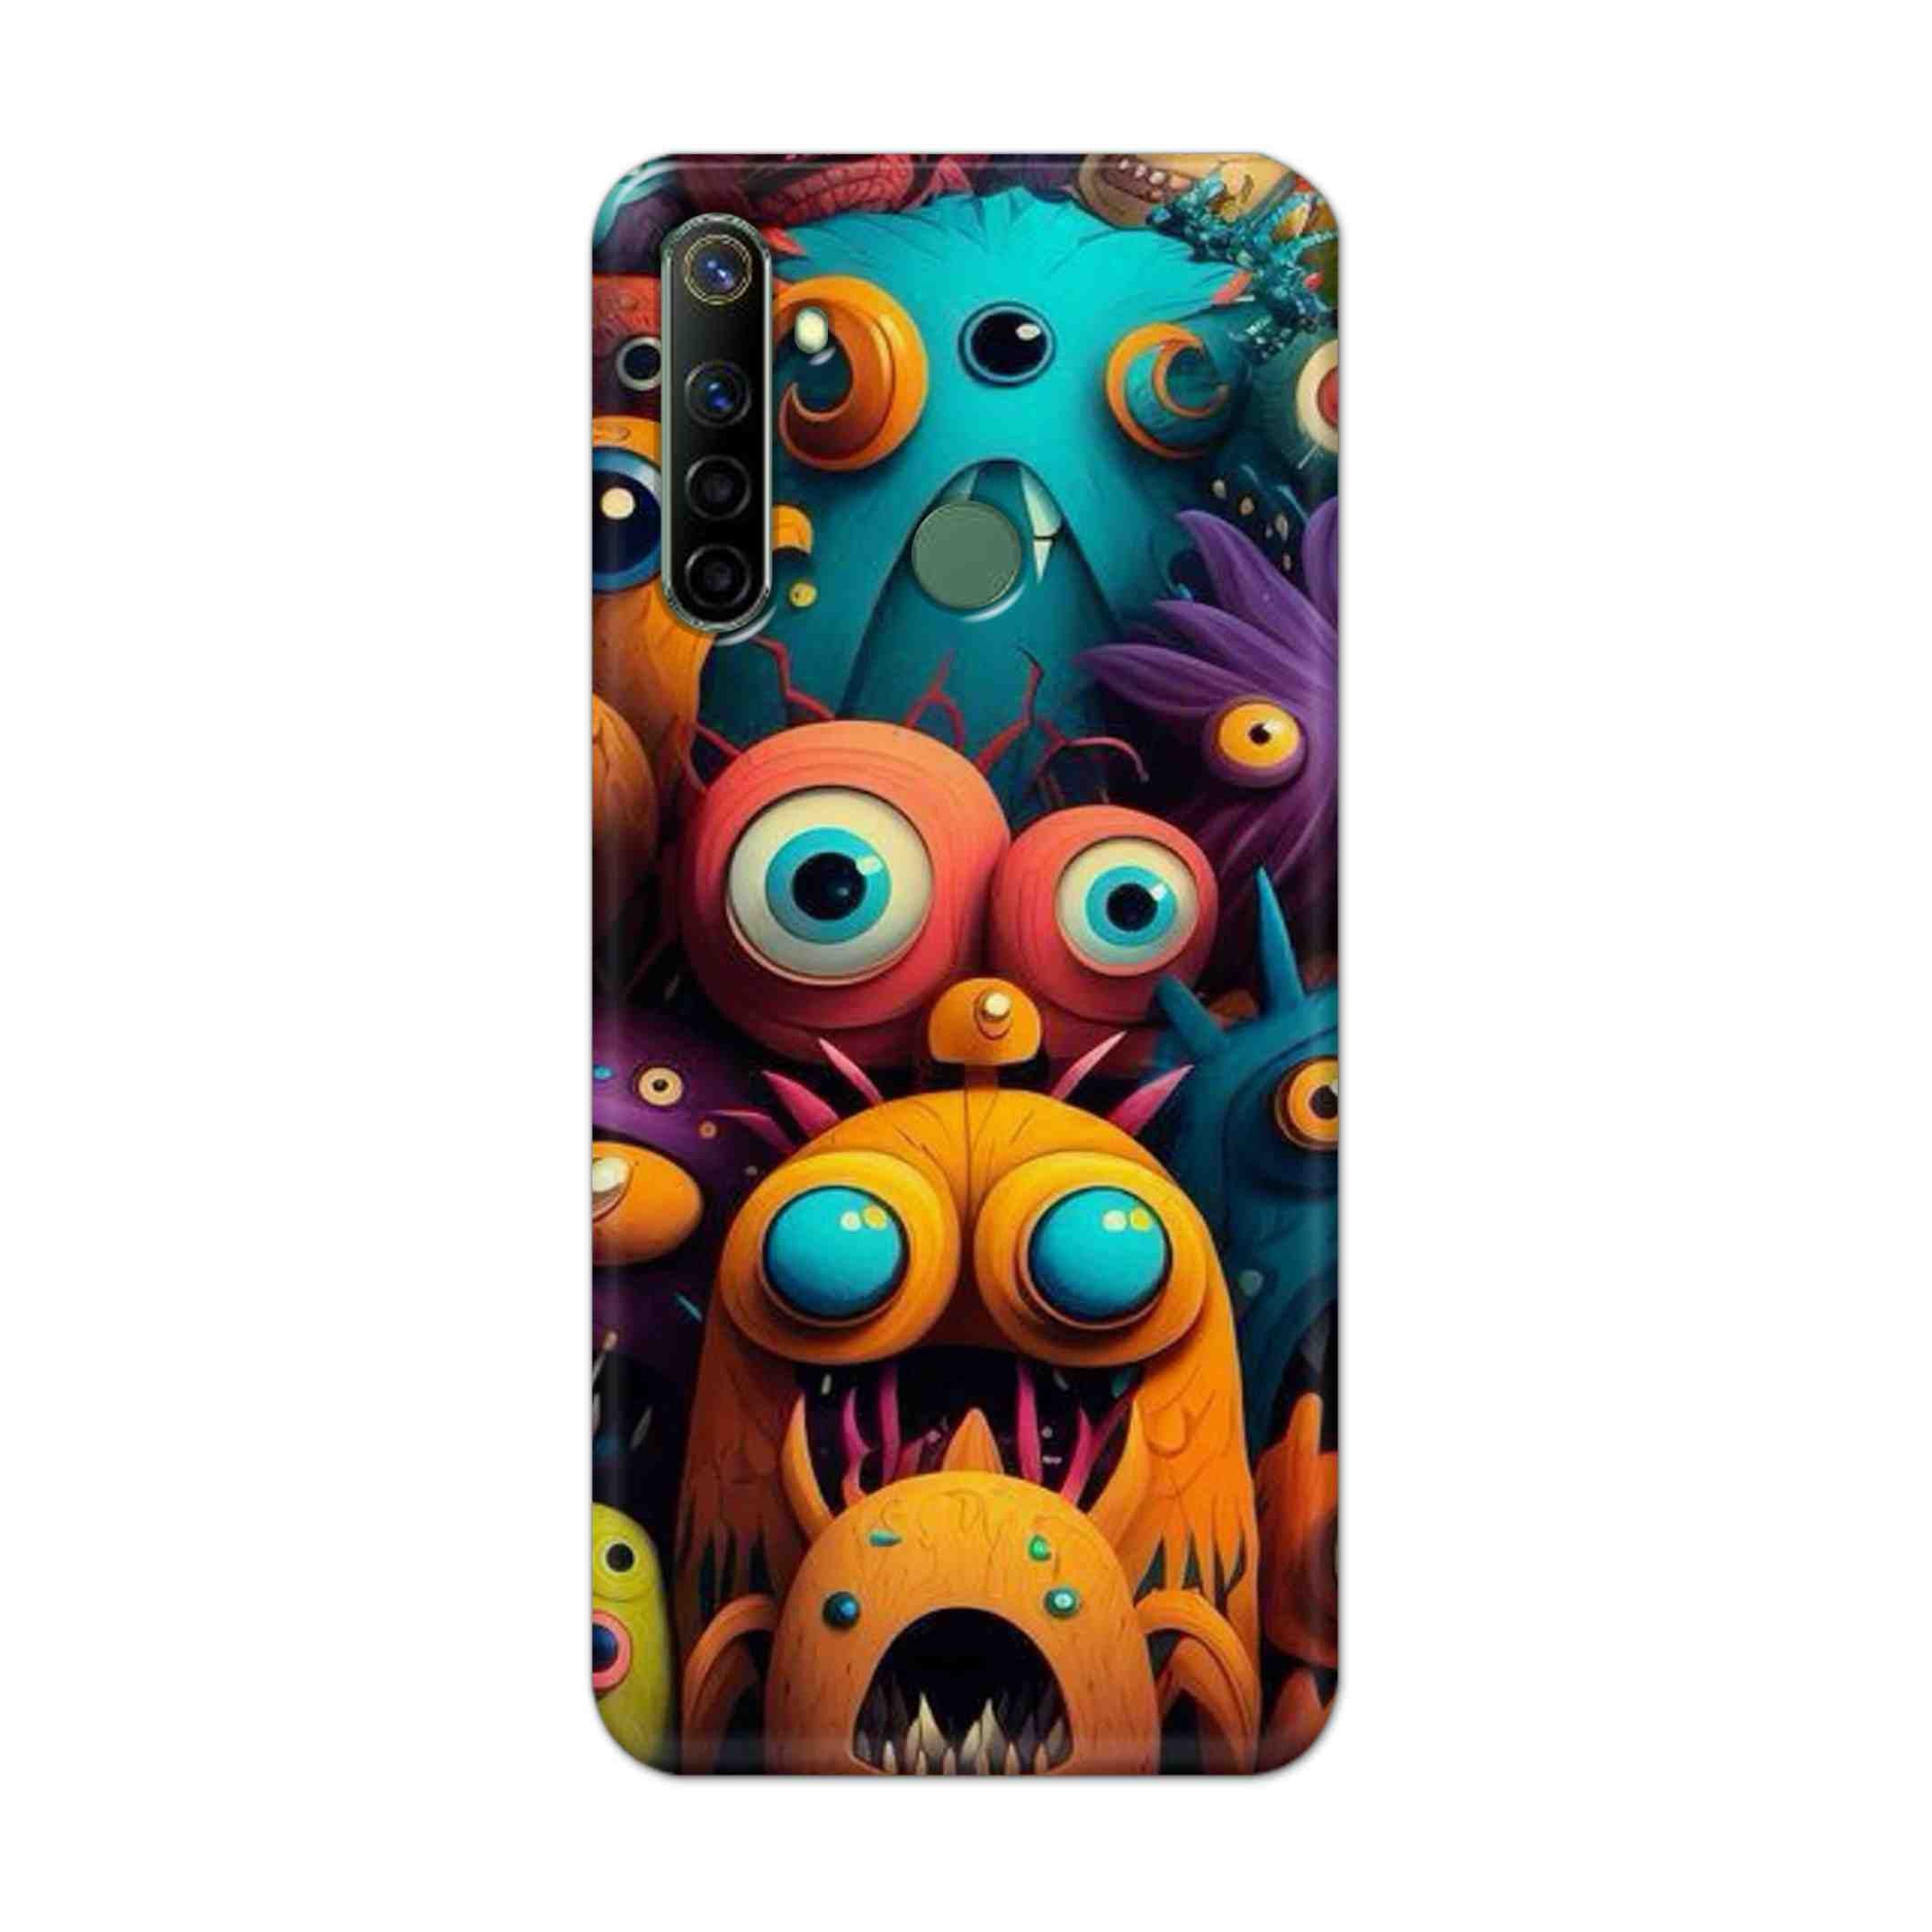 Buy Zombie Hard Back Mobile Phone Case Cover For Realme Narzo 10a Online